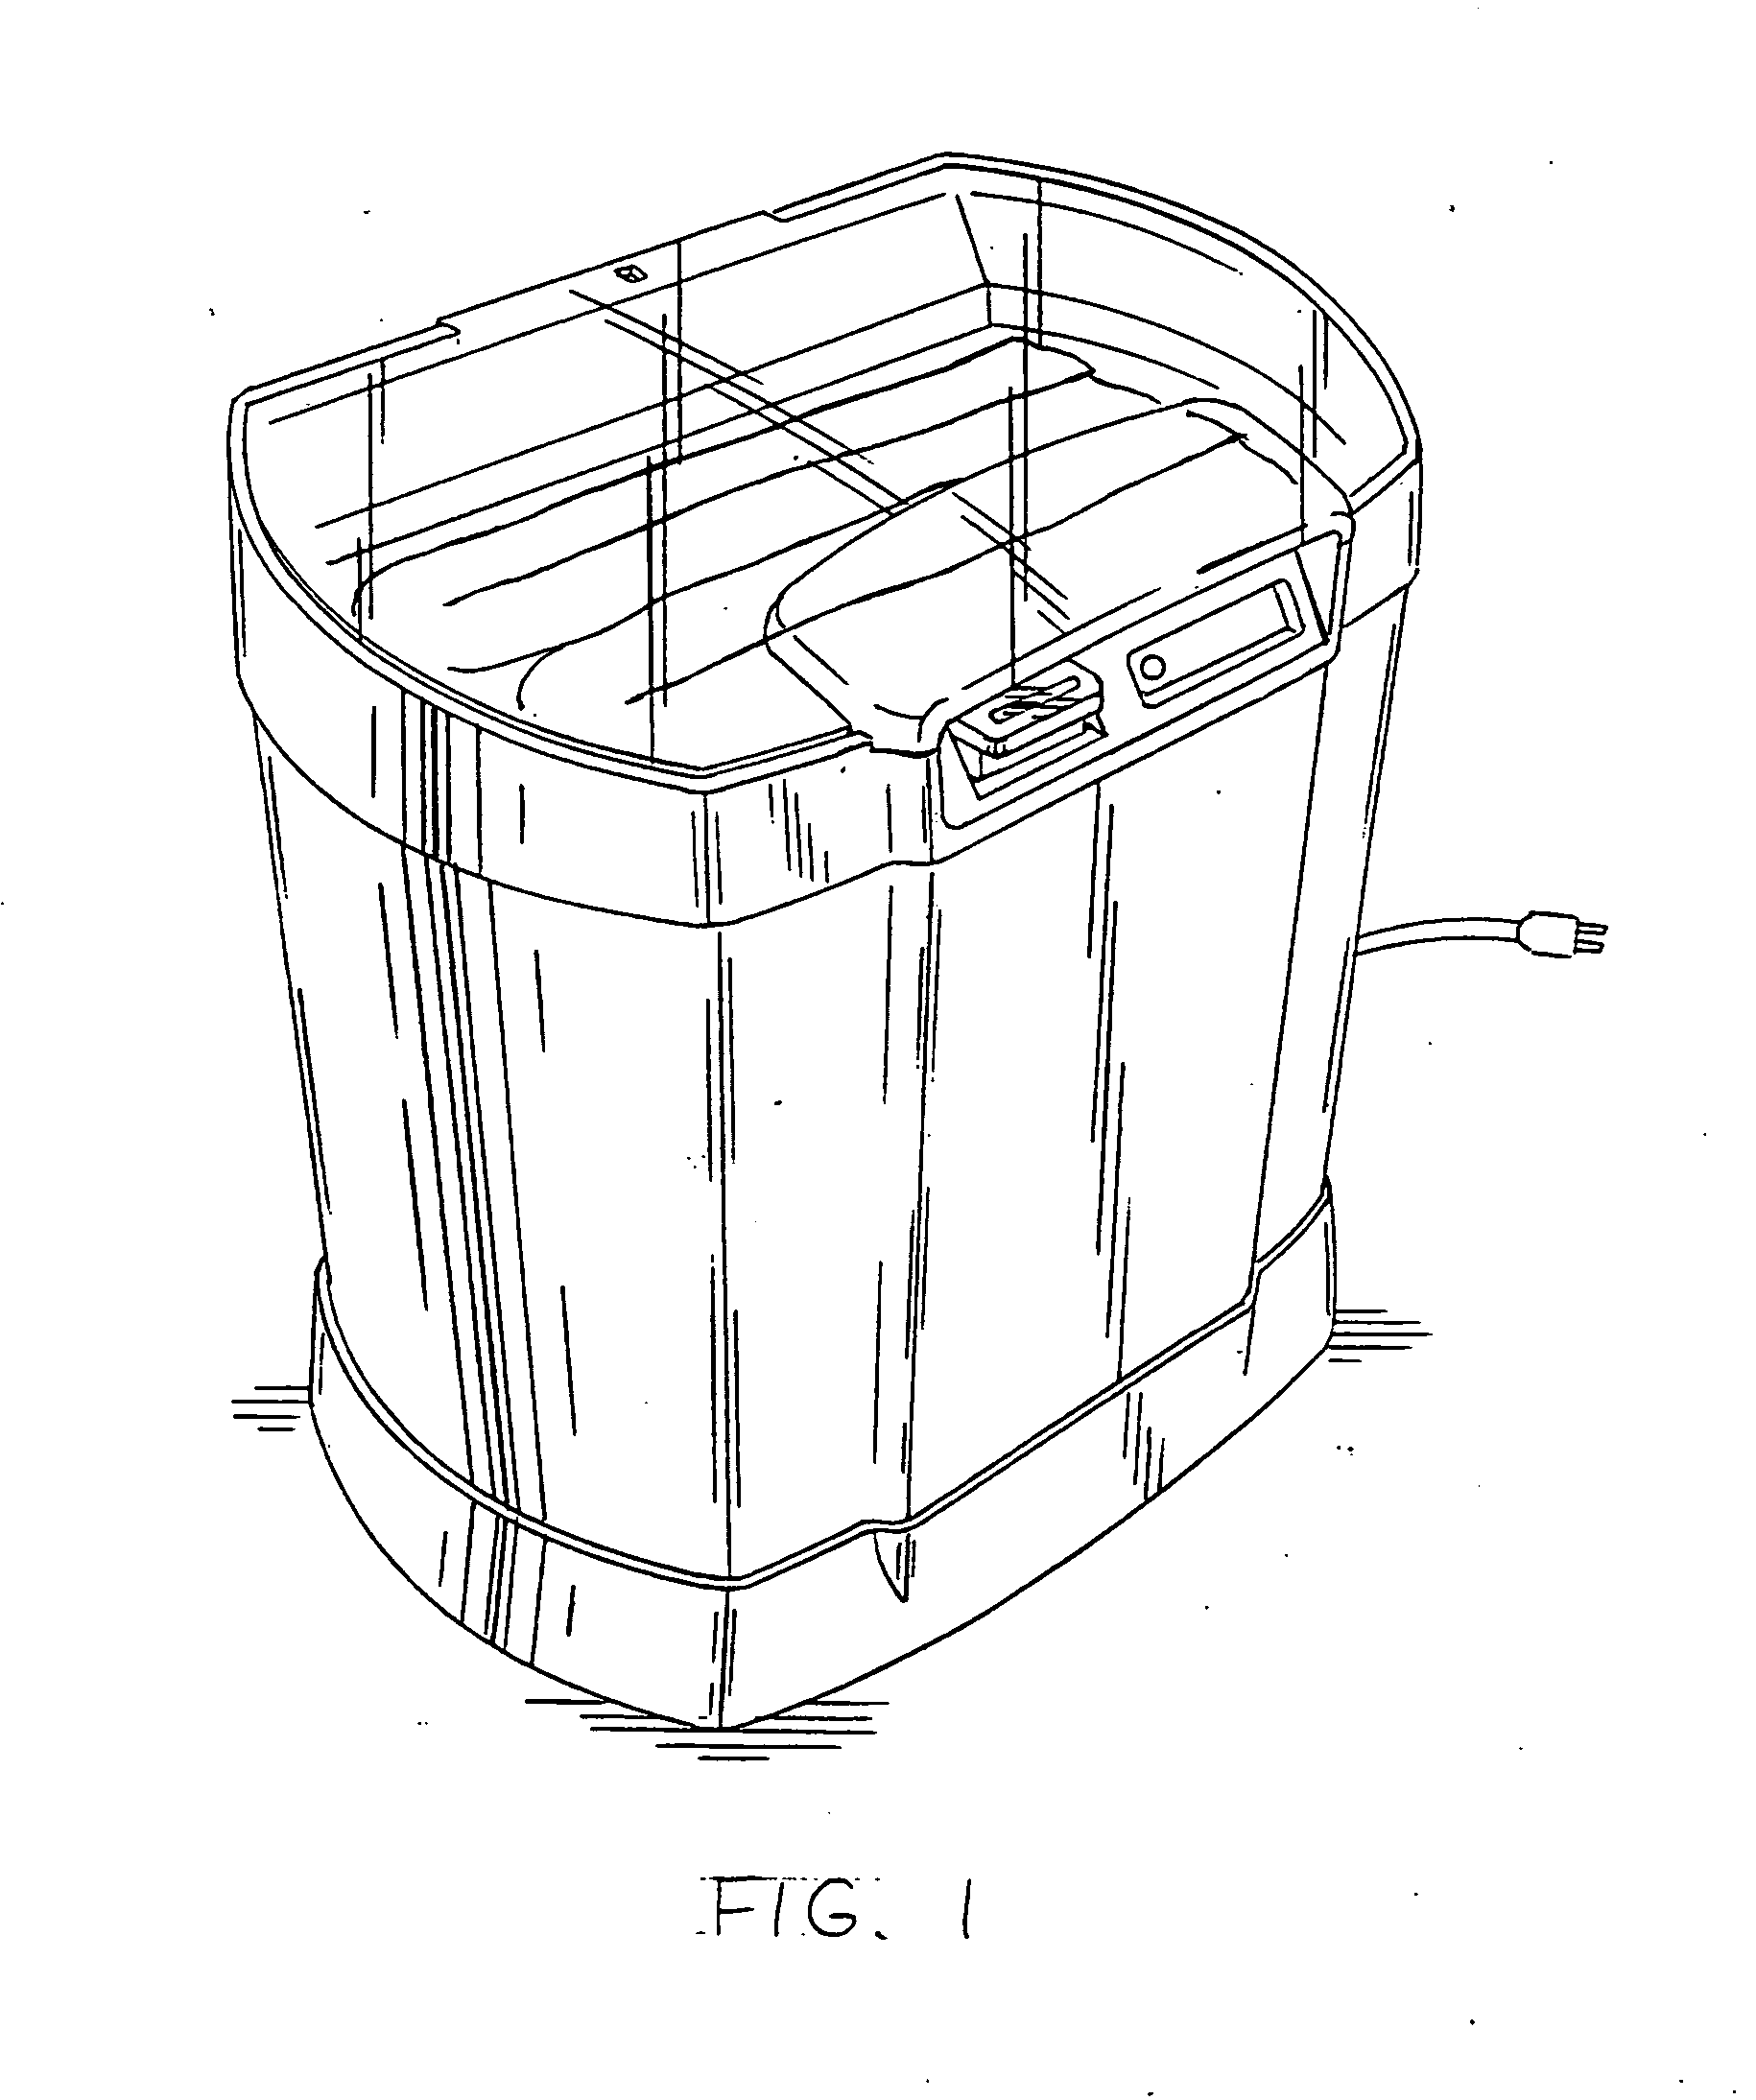 Portable warming device and method for warming an article